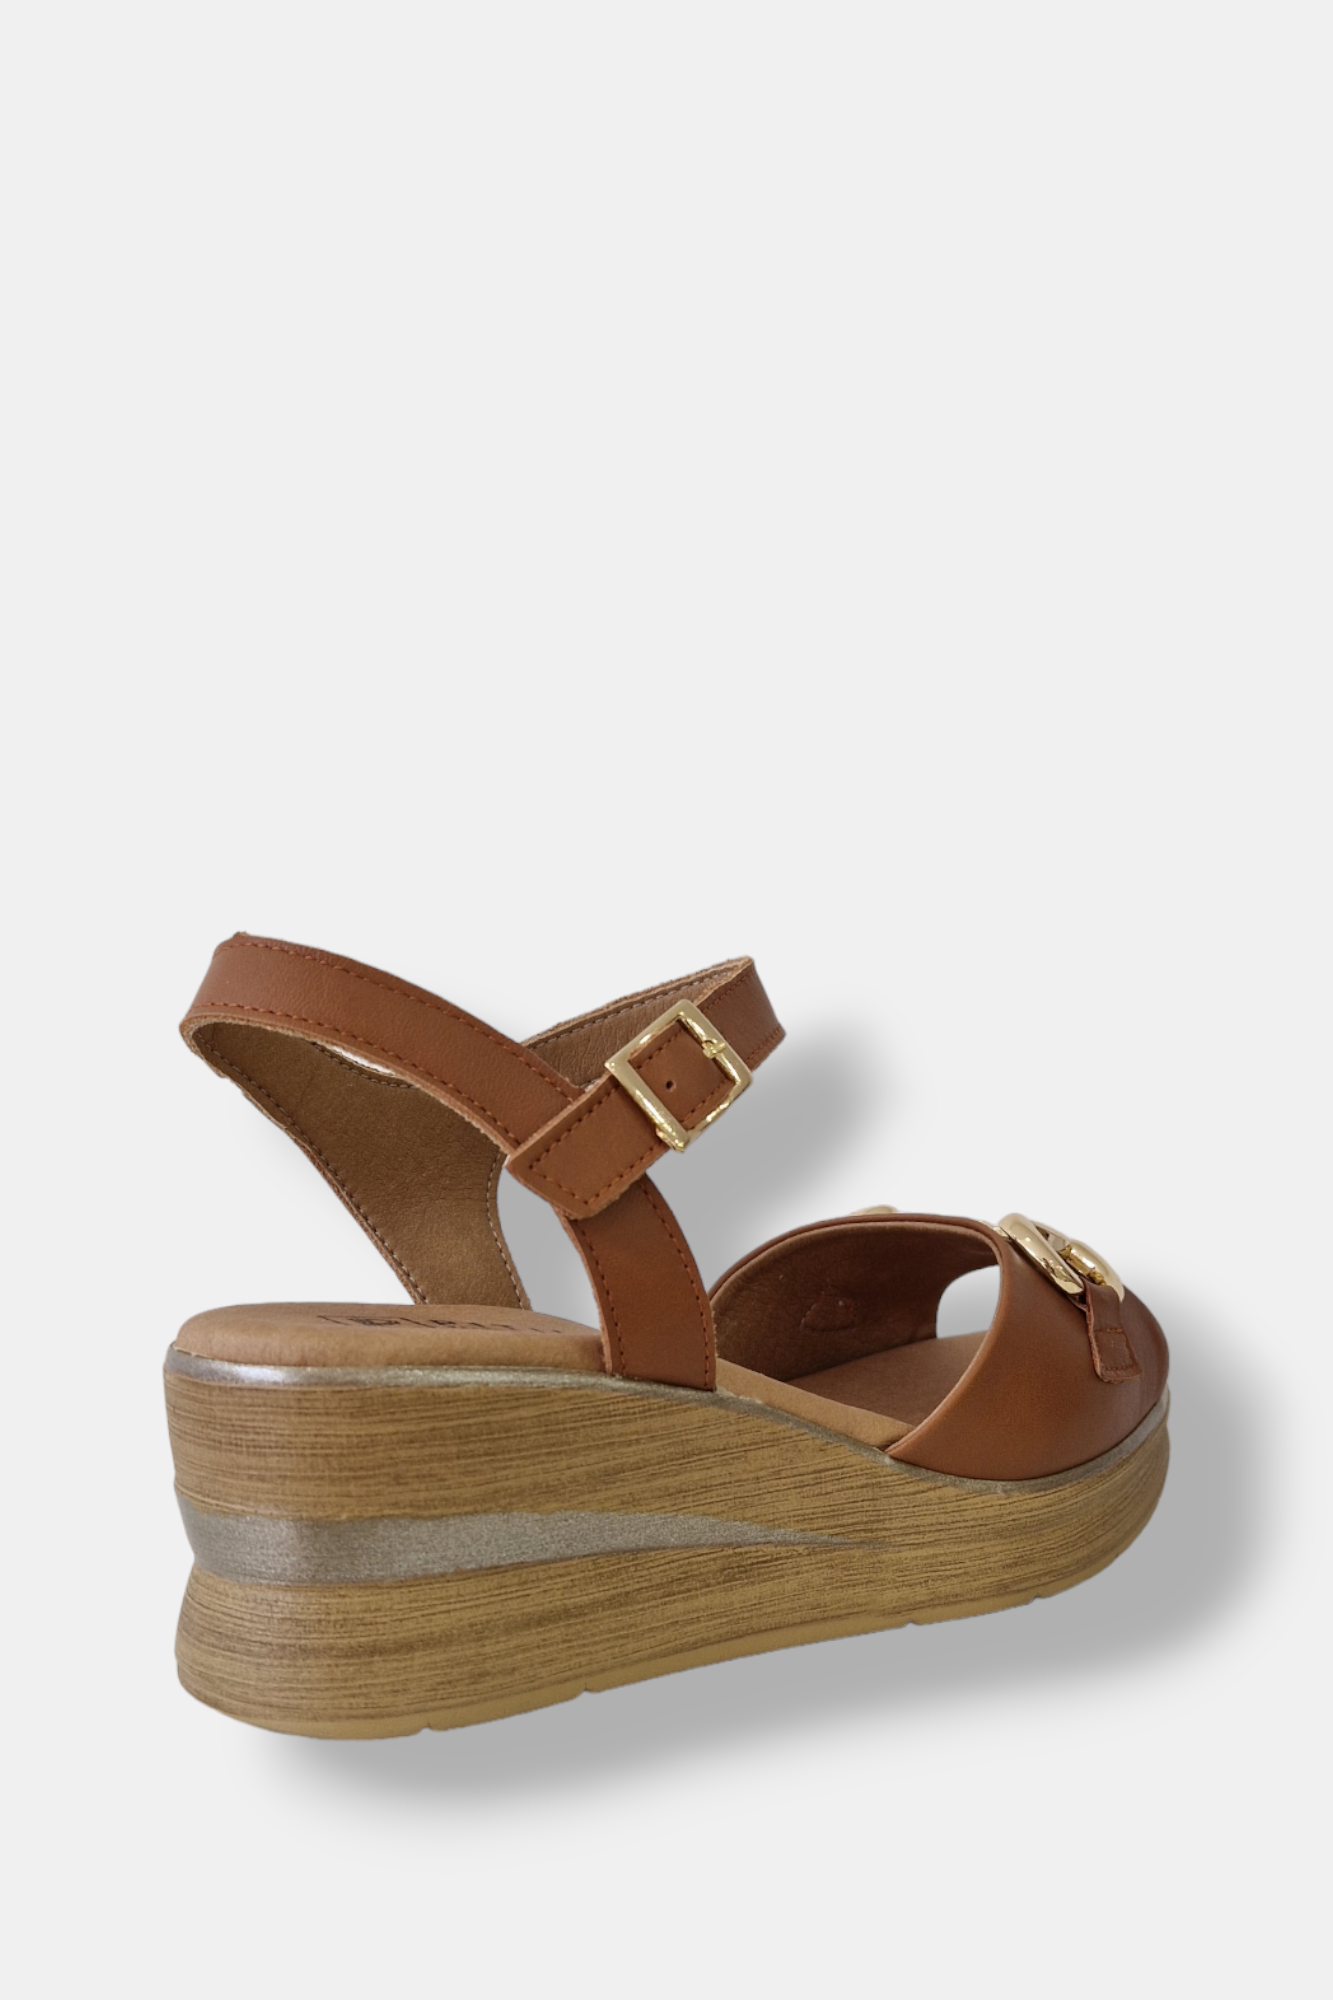 PITILLOS 5601 TAN LEATHER WEDGES